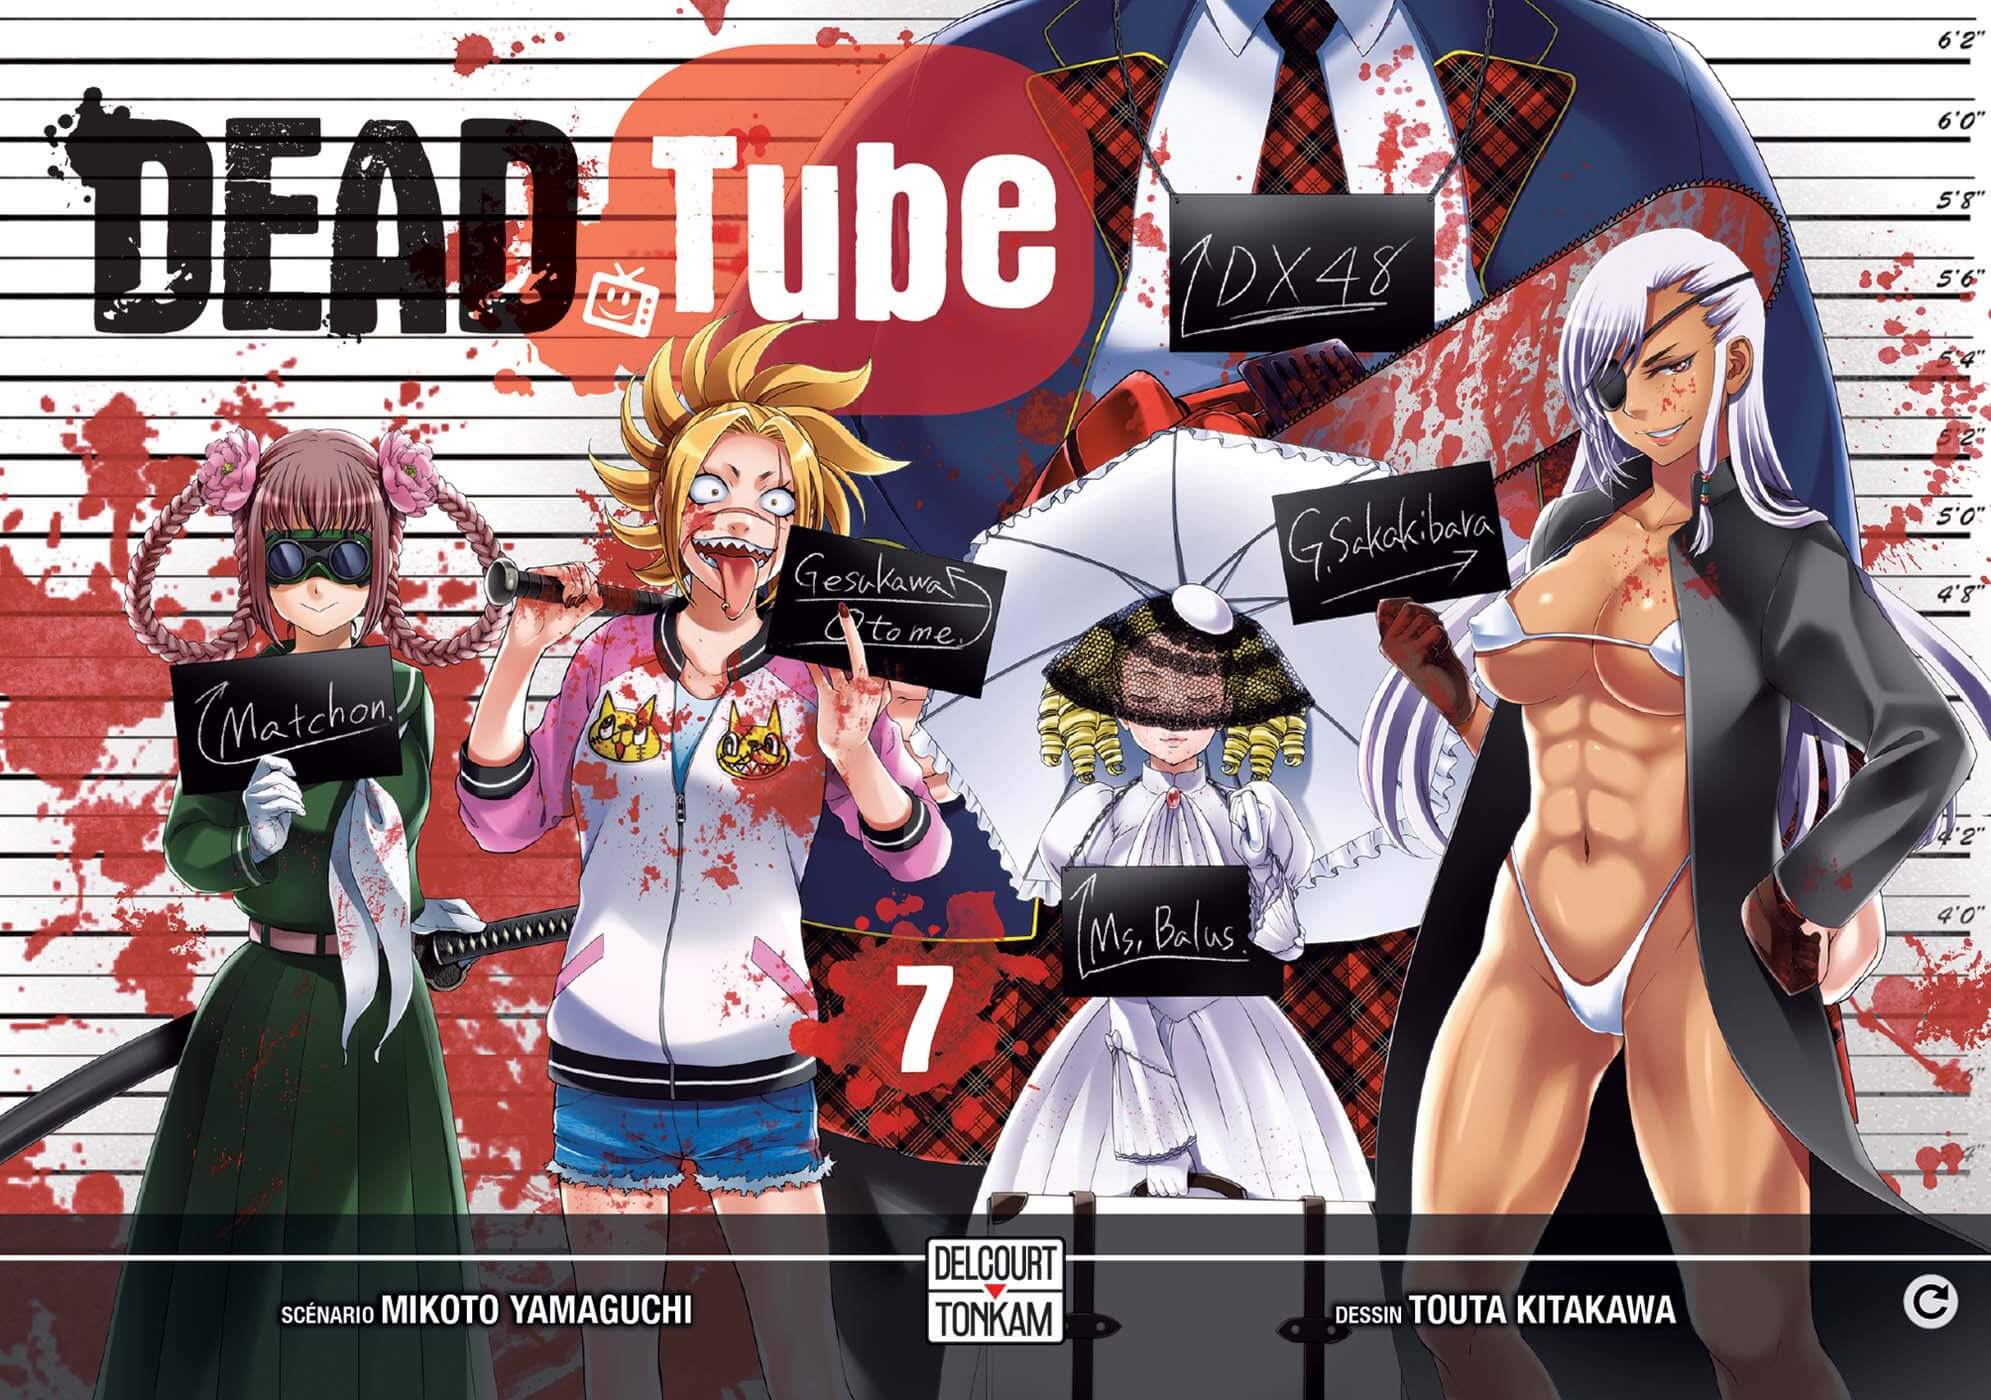 The internet is being taken over by a new famous site named Dead Tube. 